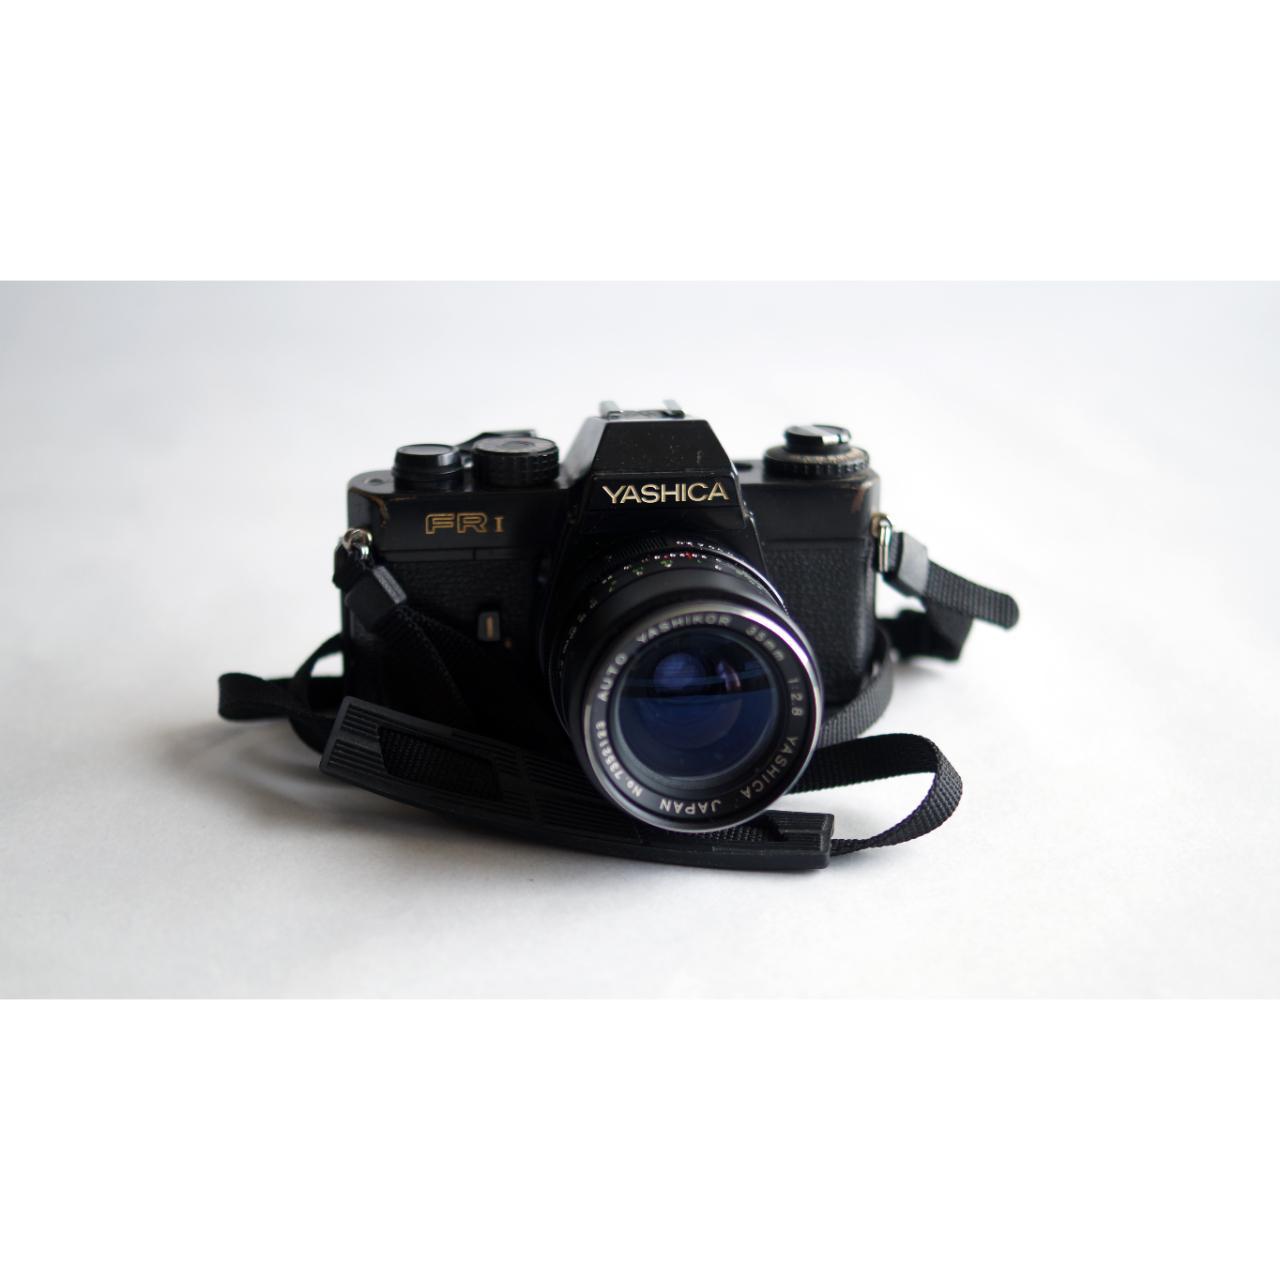 Yashica Black Cameras-and-accessories (2)